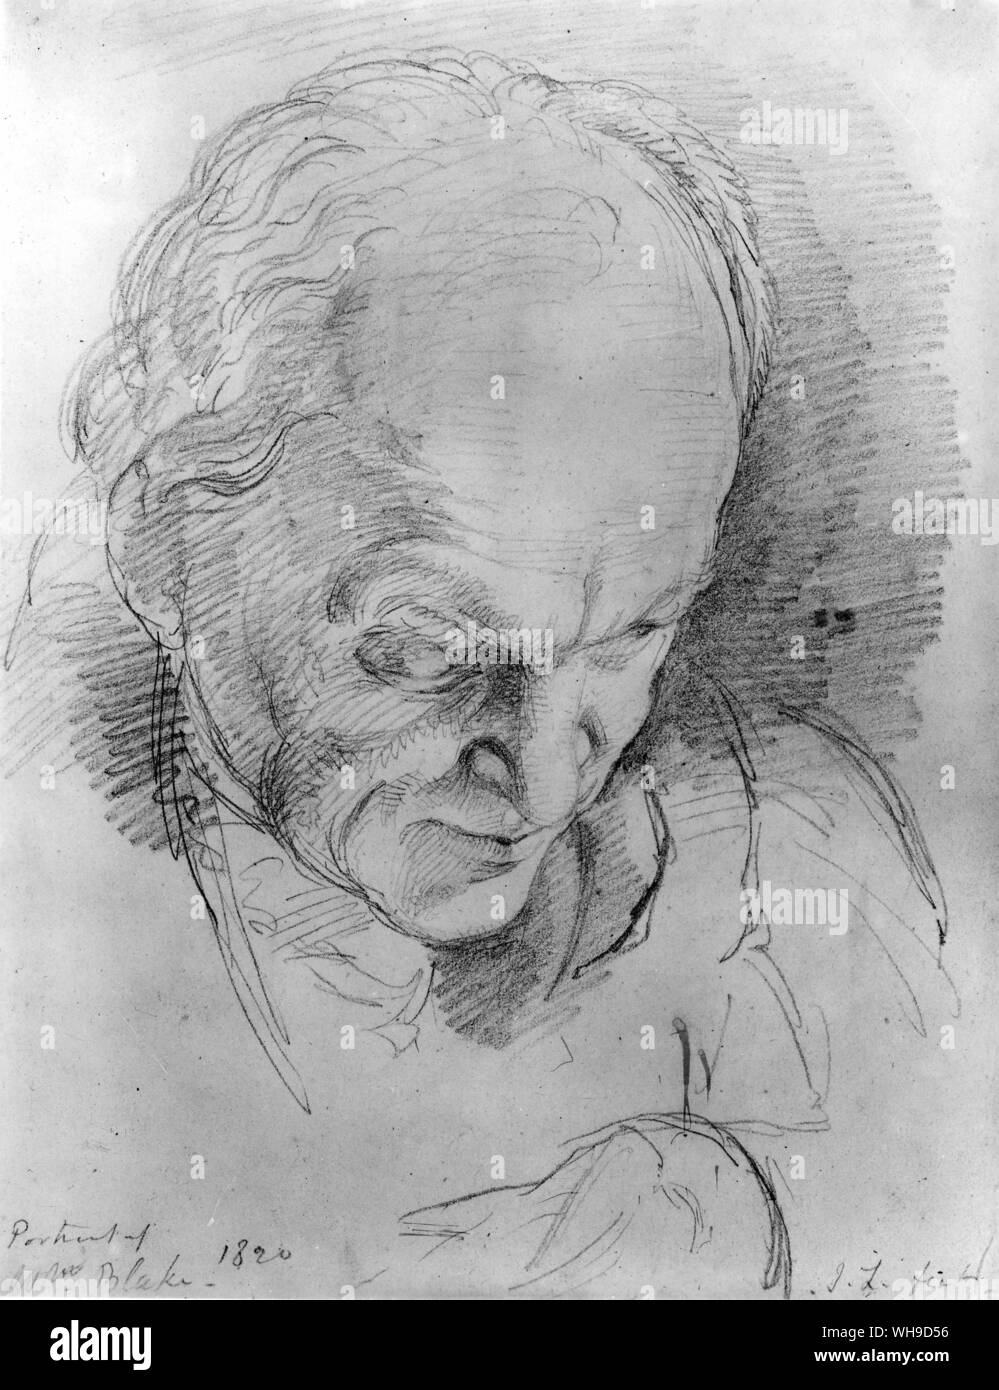 English poet, William Blake, 1757-1827. Drawing by J. Linnell, 1820. Stock Photo